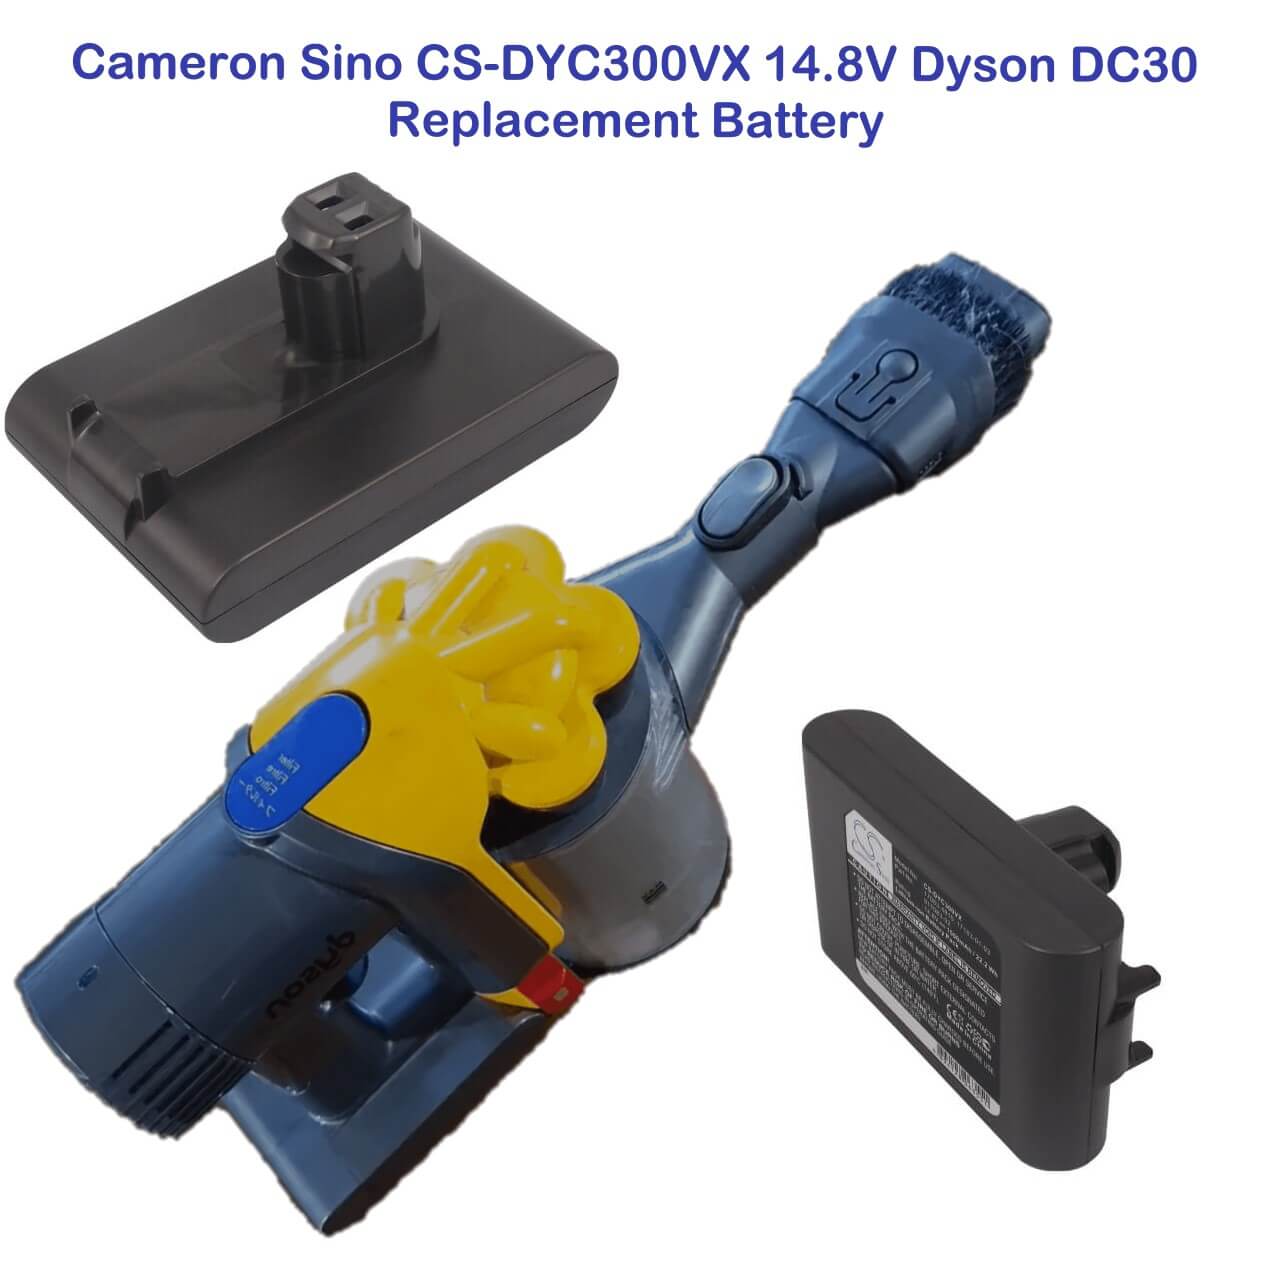 14.8V Dyson DC30 battery replacement